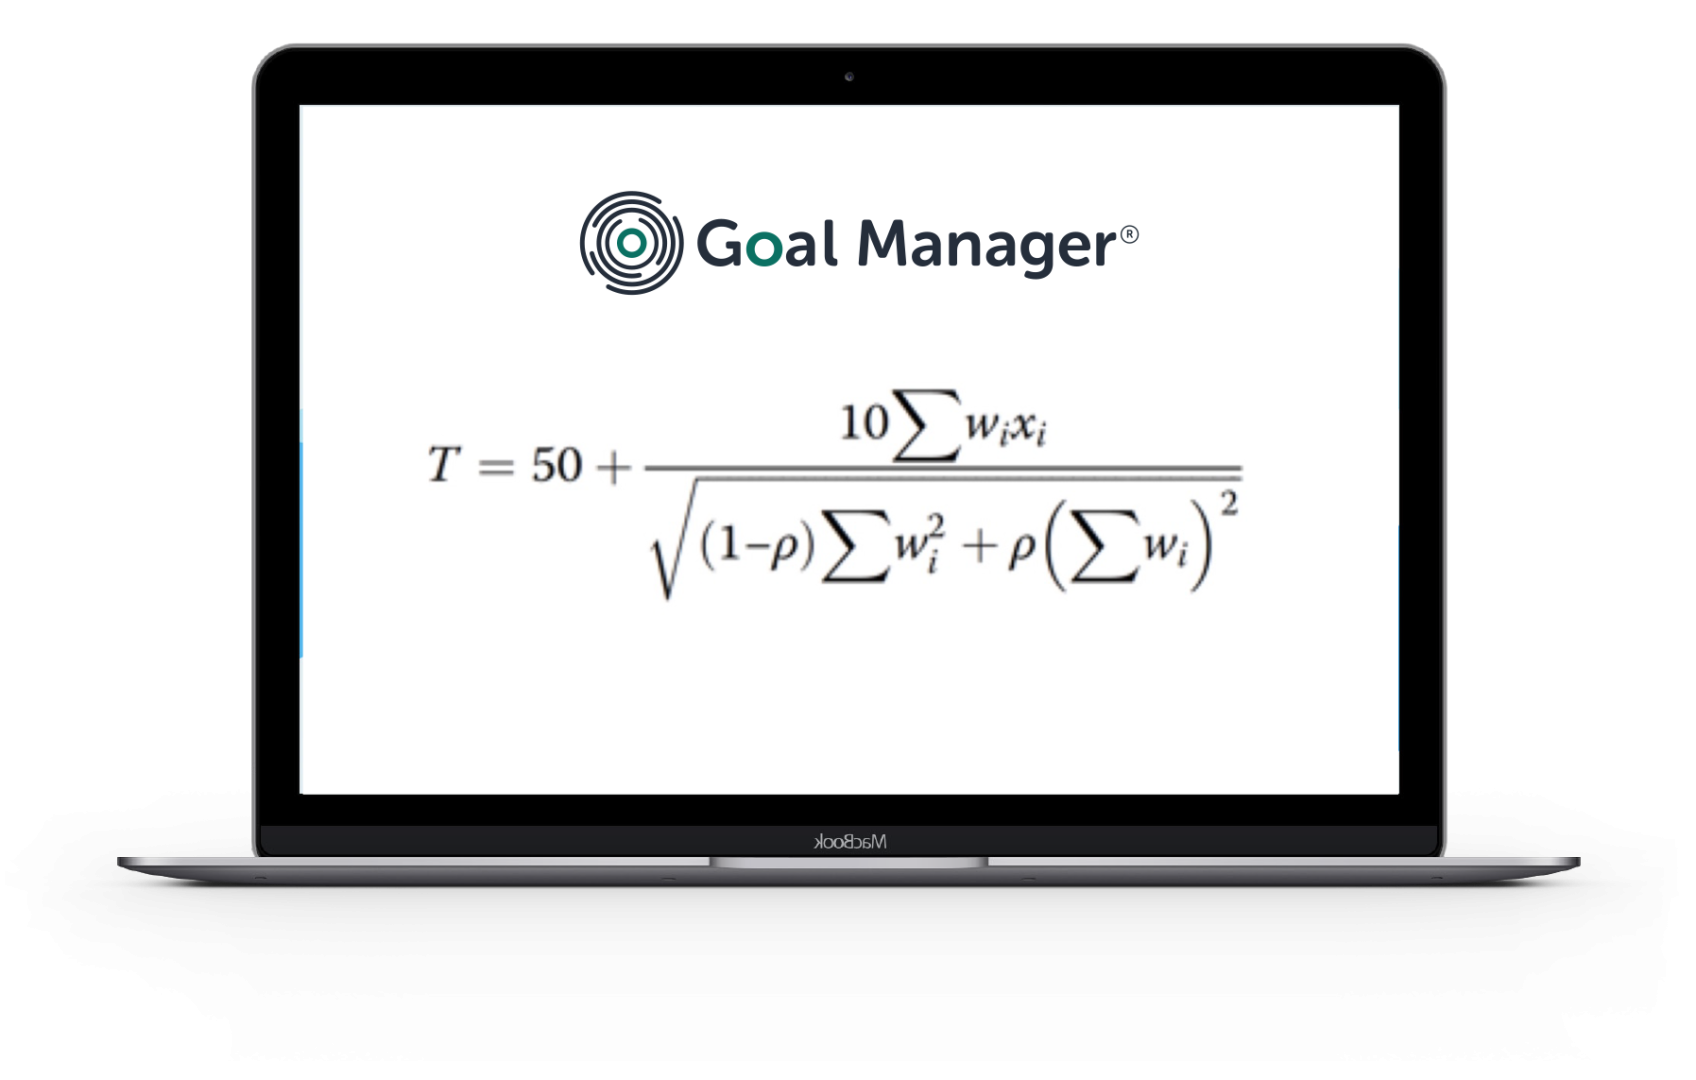 Meausring Goal Attainment Scaling